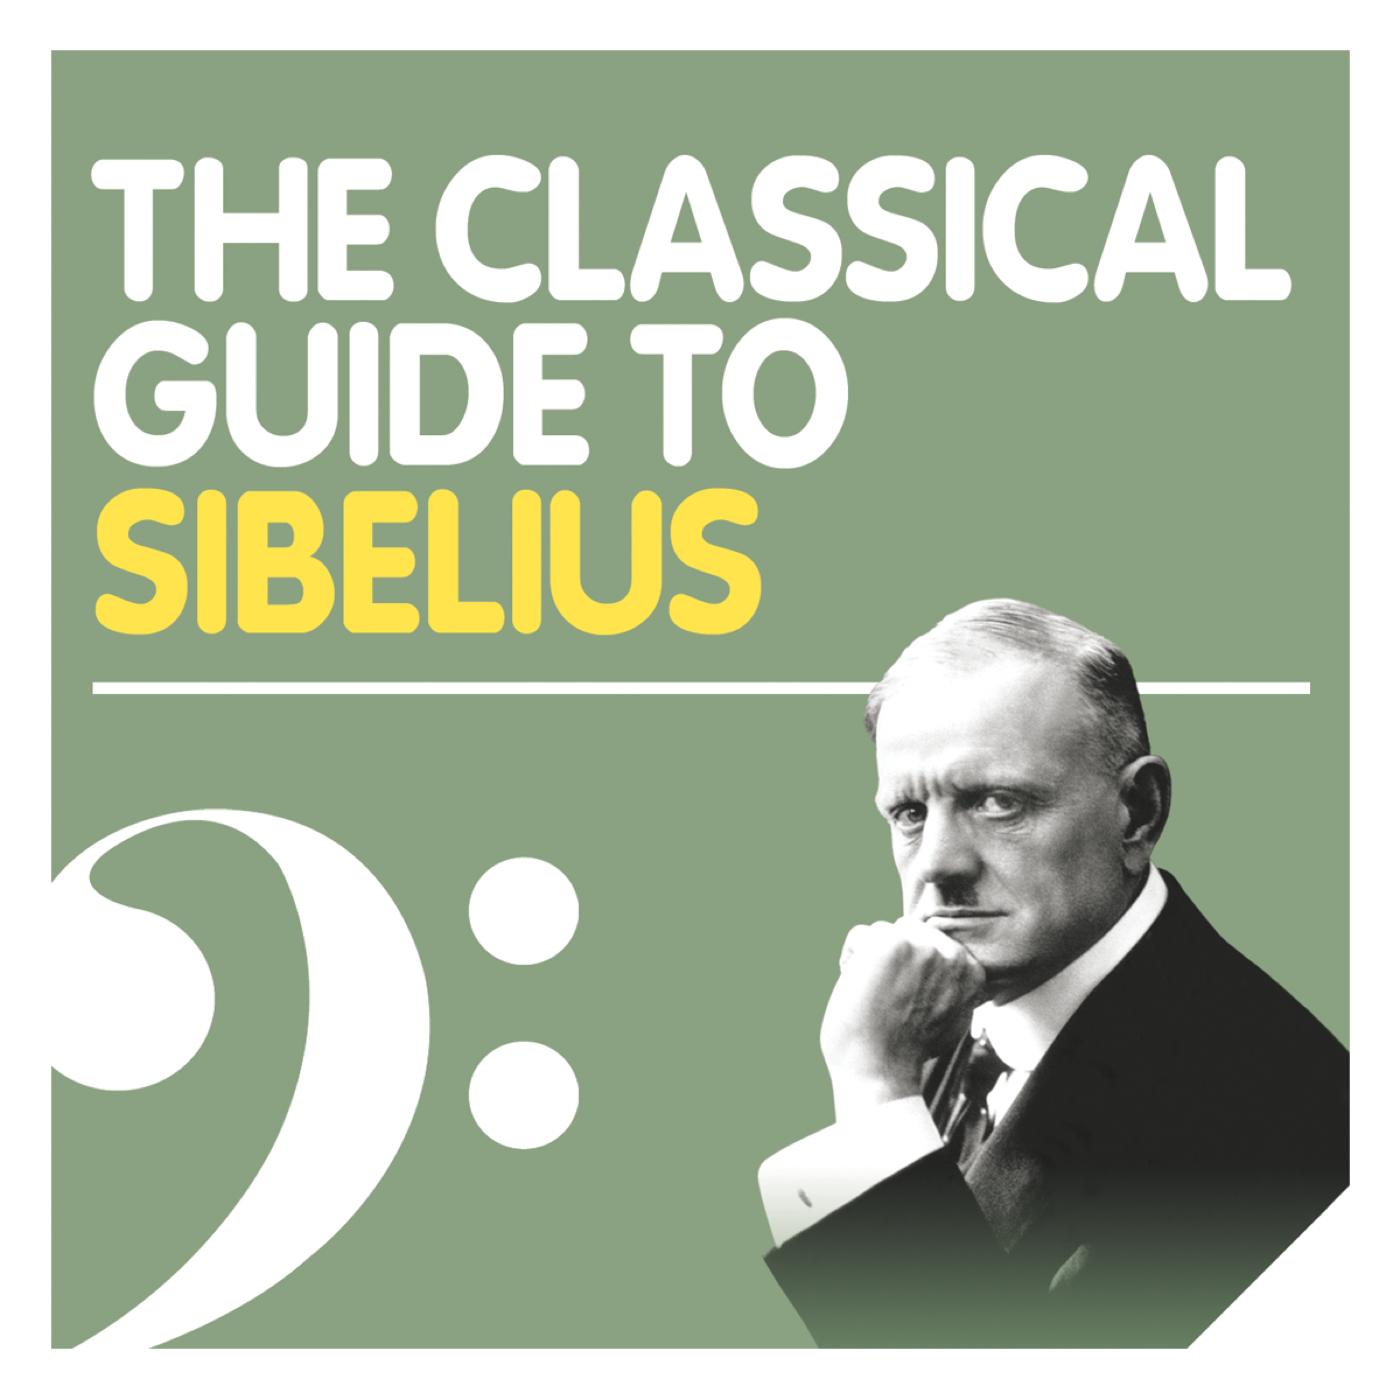 The Classical Guide to Sibelius